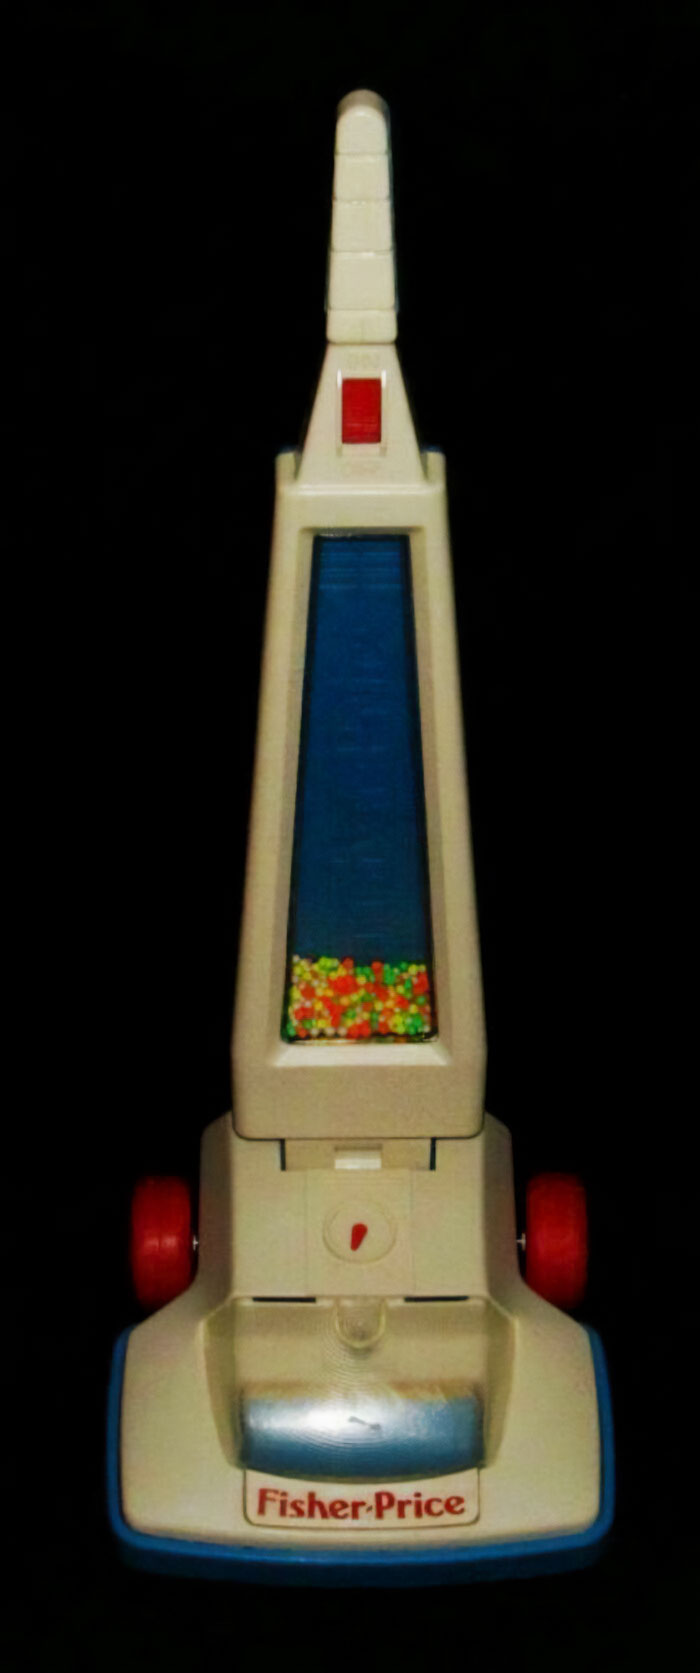 Who Remembers This Huge Fisher Price Vacuum